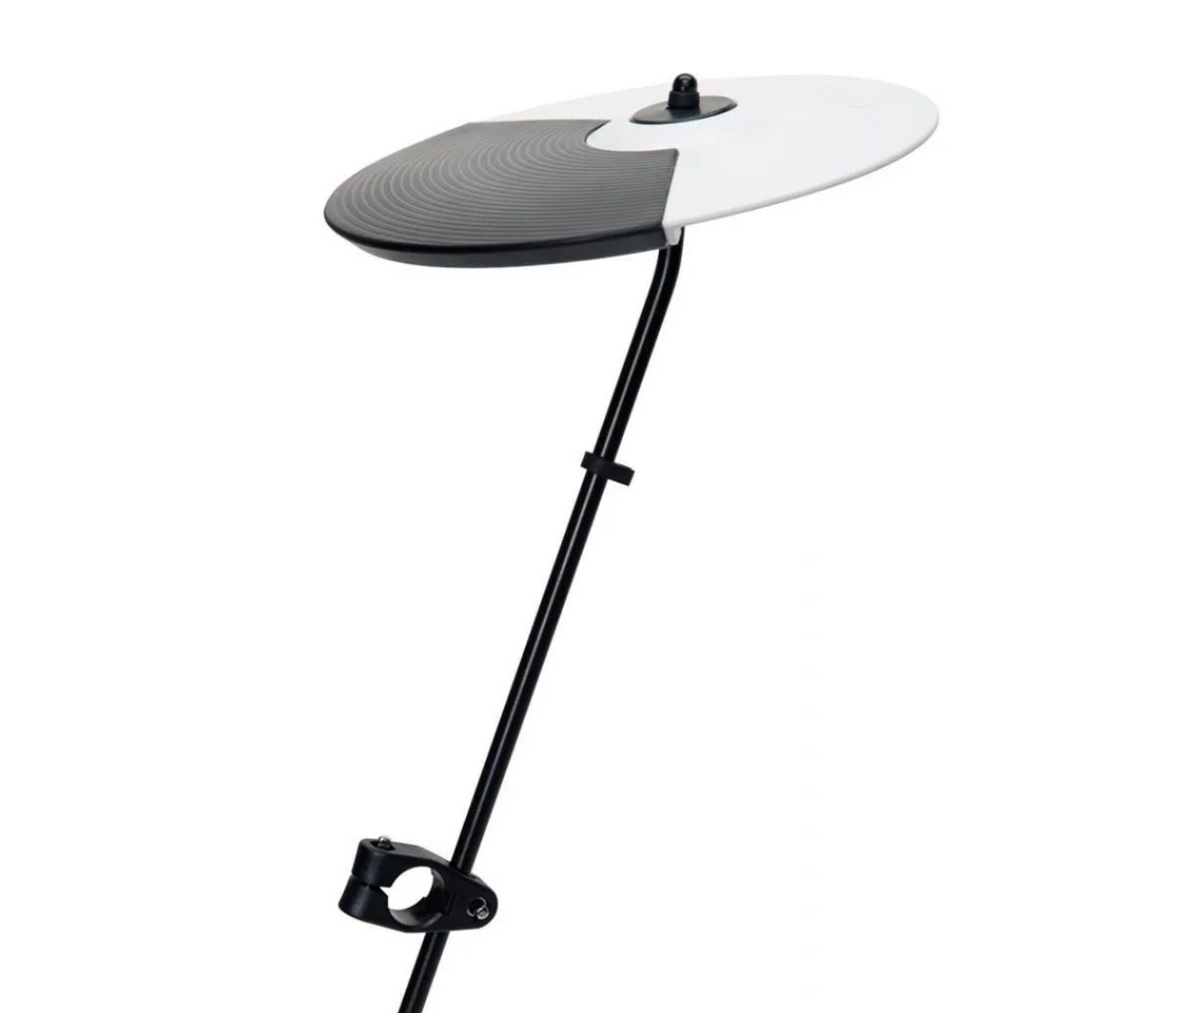 Roland OP-TD1C Drum Cymbal Set, Cymbal Pad and Mounting Hardware for TD-1KV or TD-1K V-drums